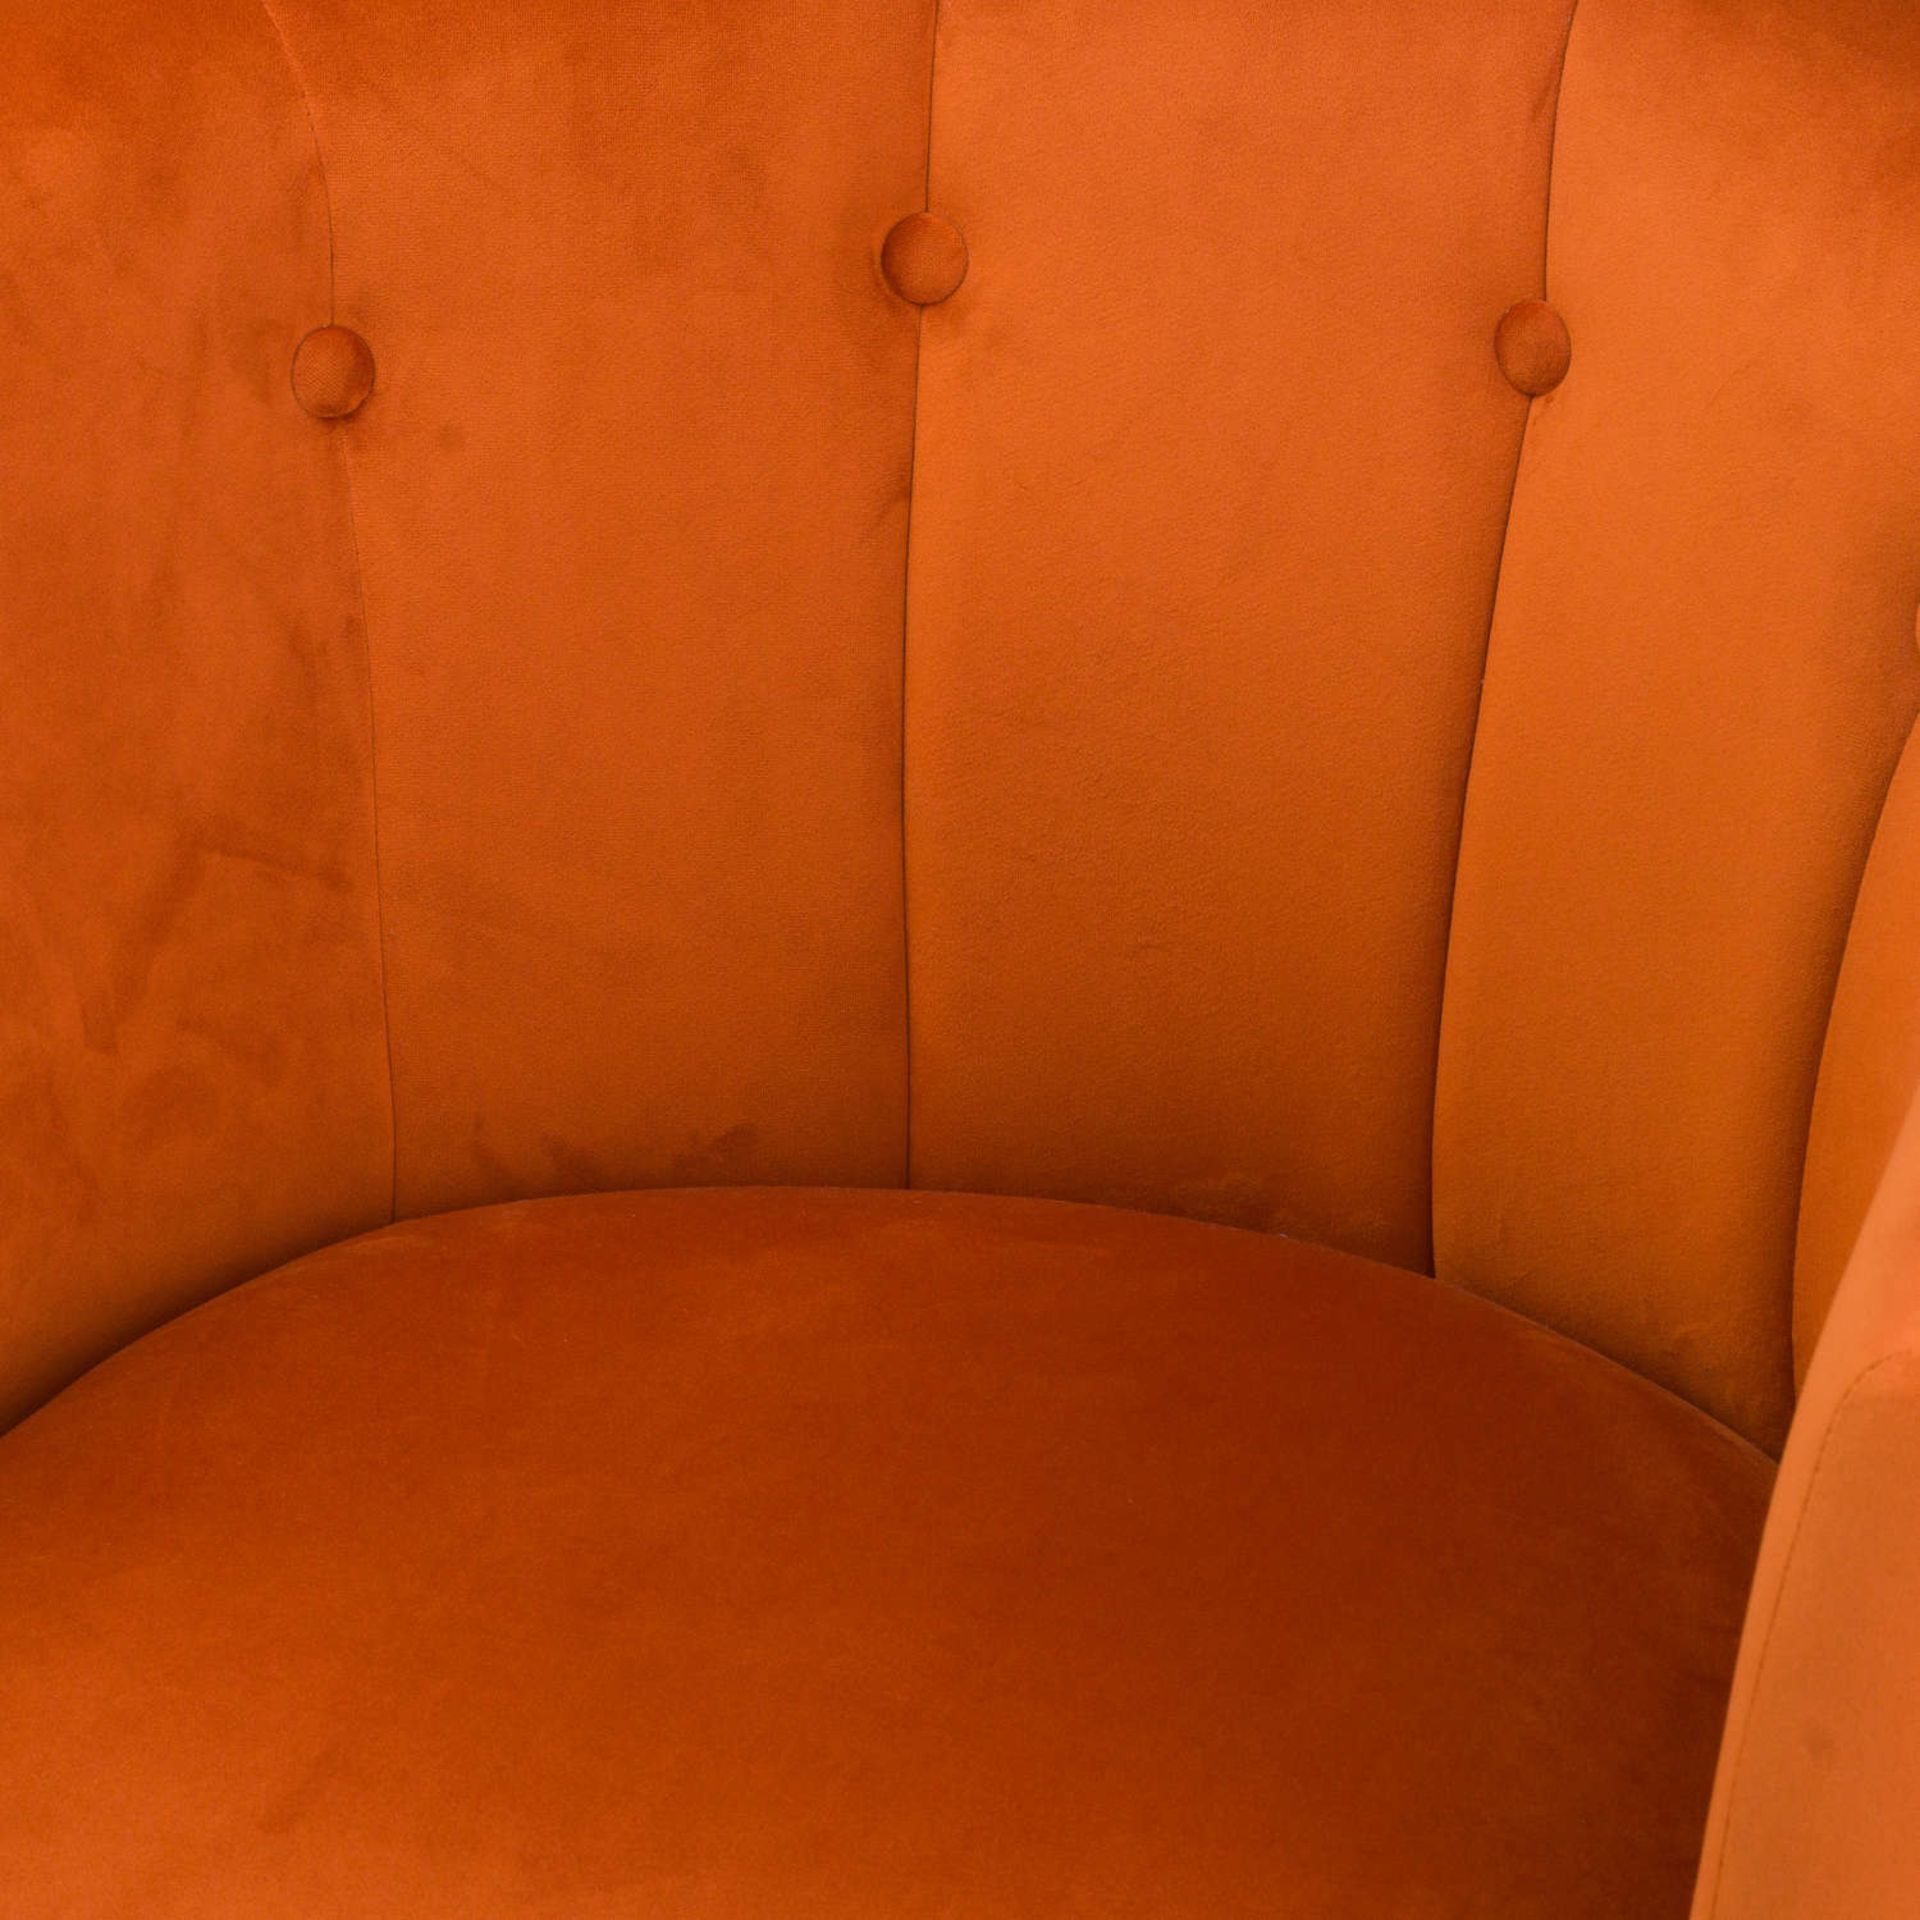 Rust Velvet Urban Tub Chair, this is a large tub chair making it a practical and cosy addition to - Image 2 of 3